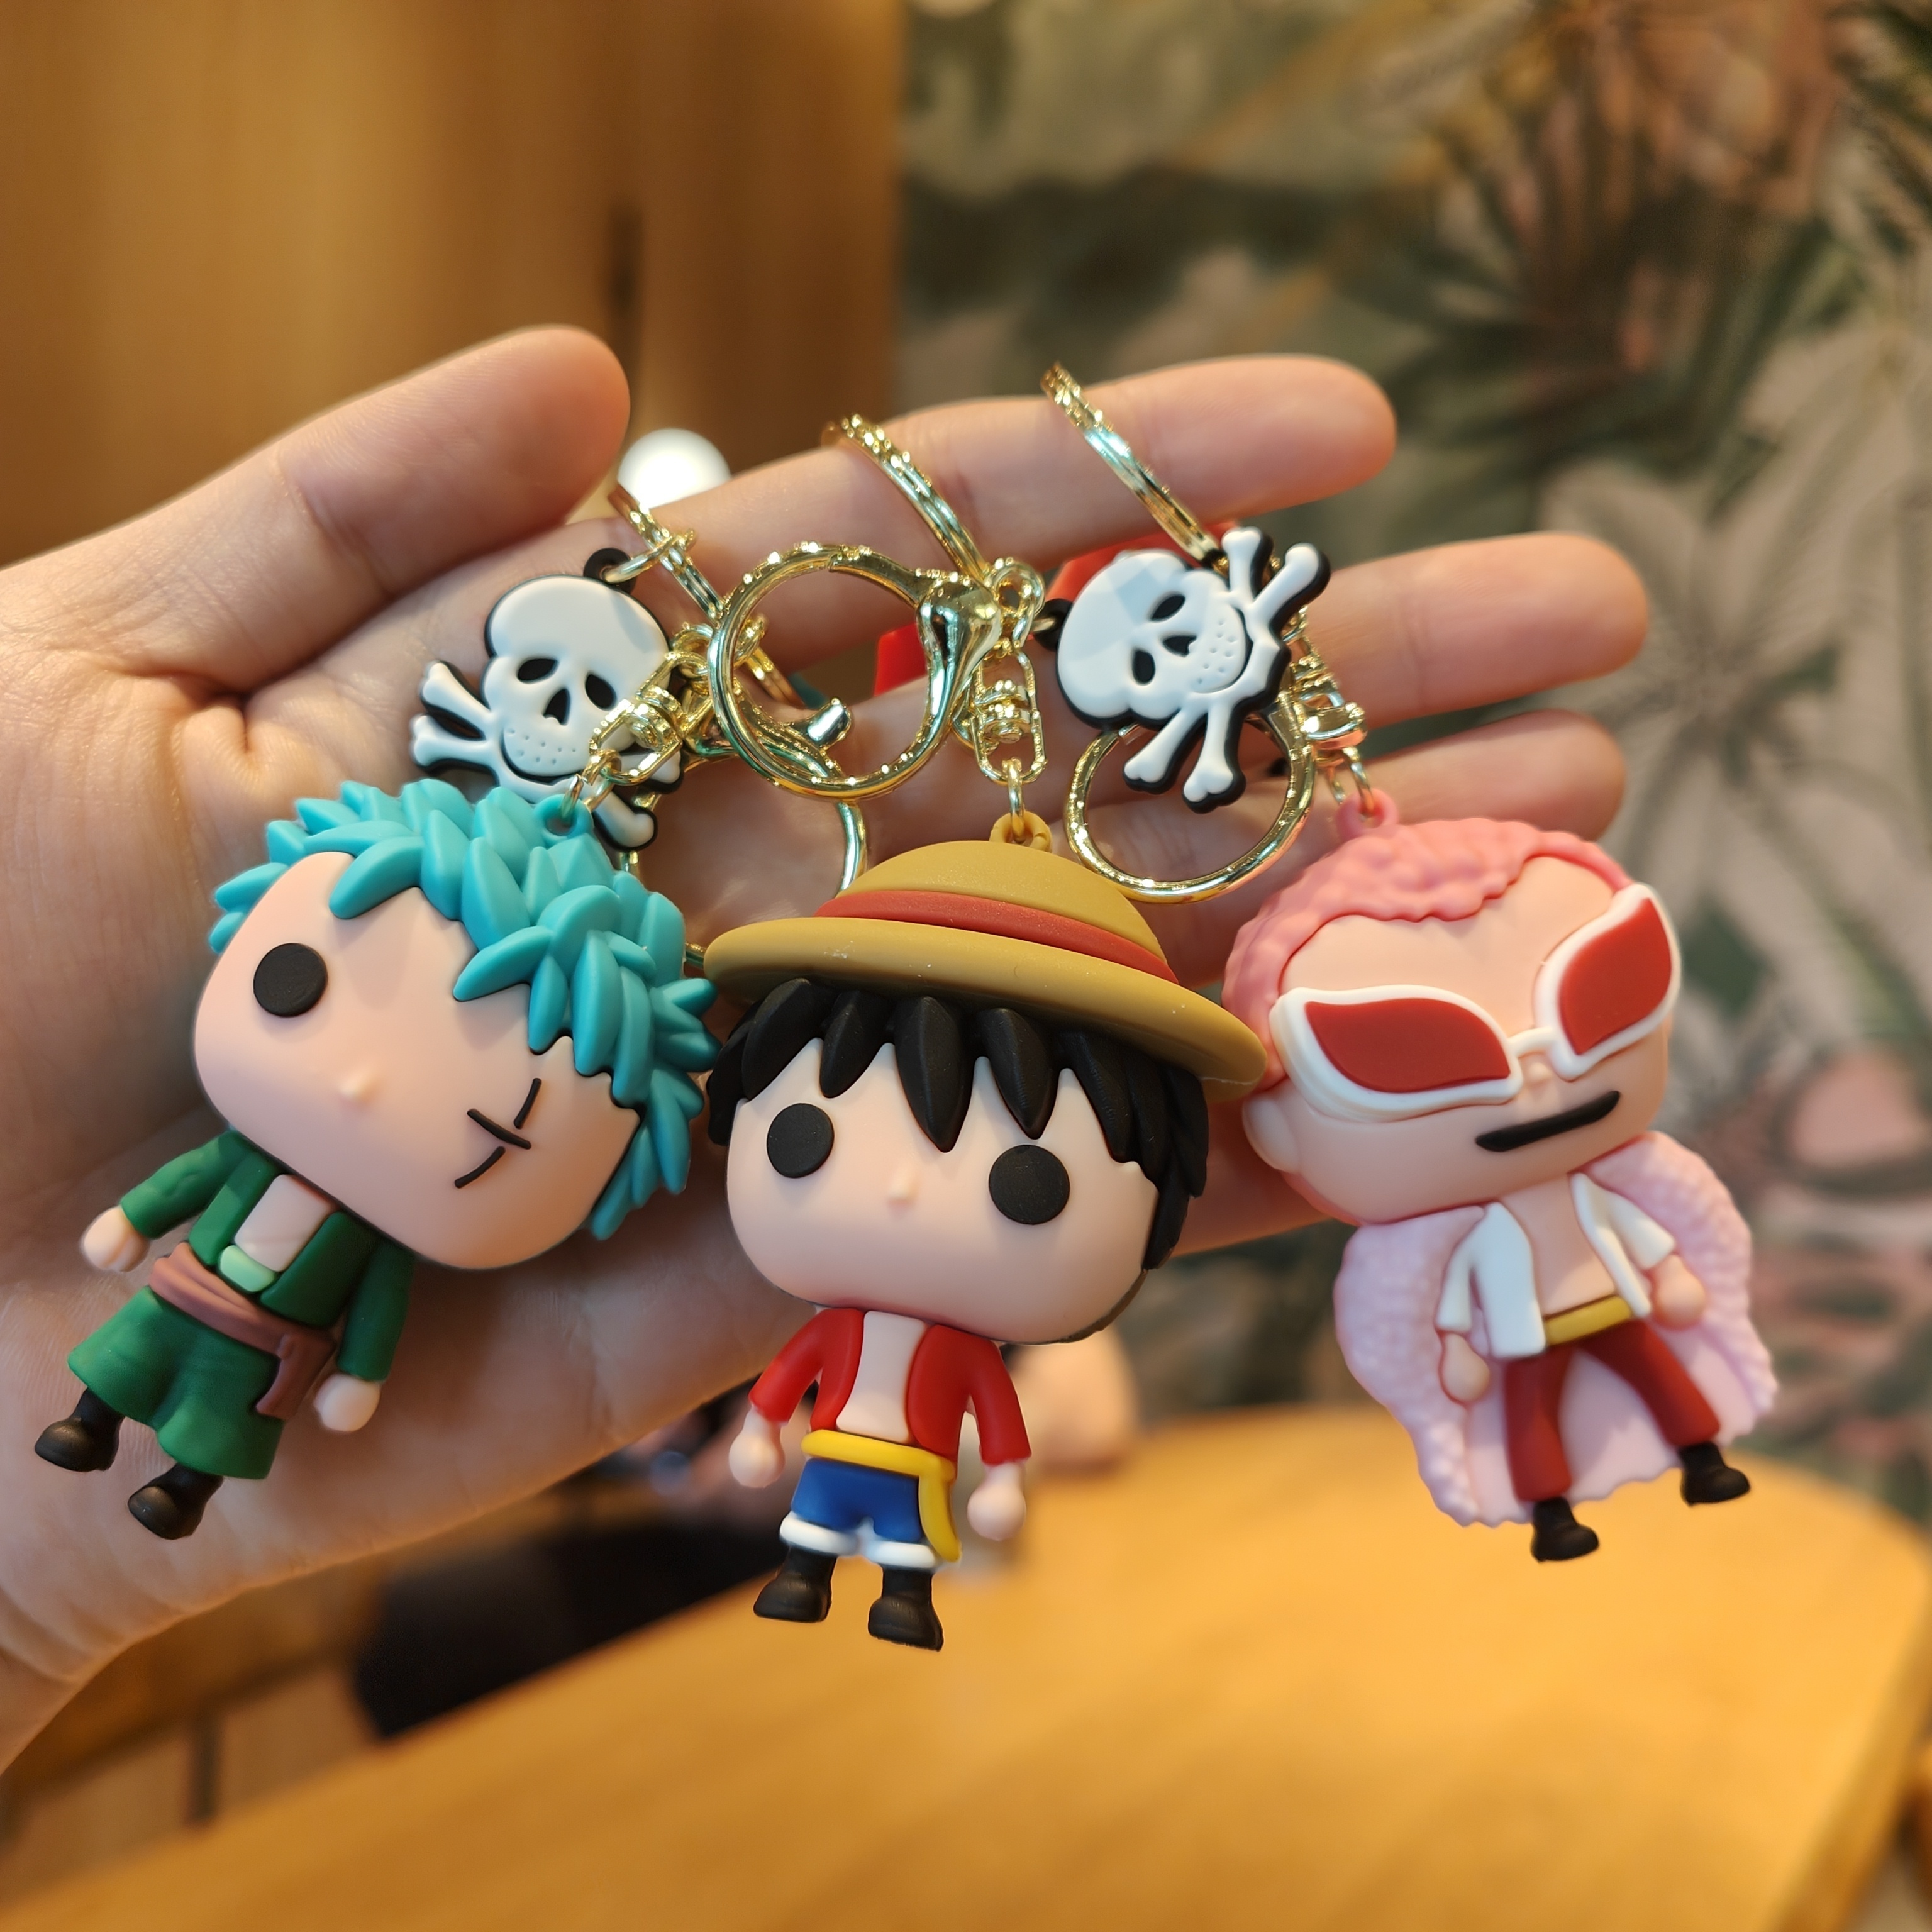 One Piece [Anime] Keychains | Shopee Philippines